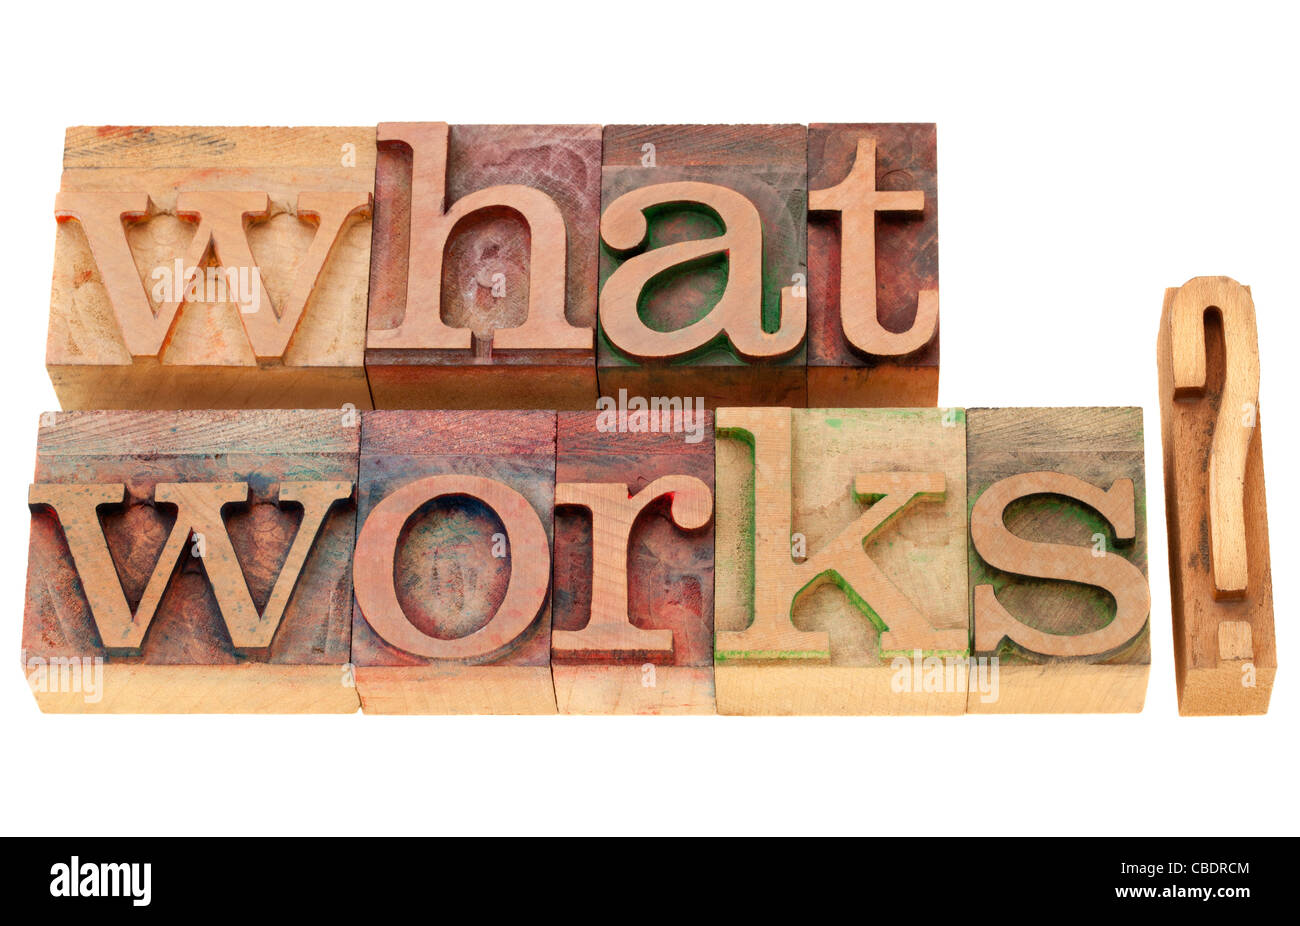 what works - isolated question in vintage wood letterpress printing blocks Stock Photo